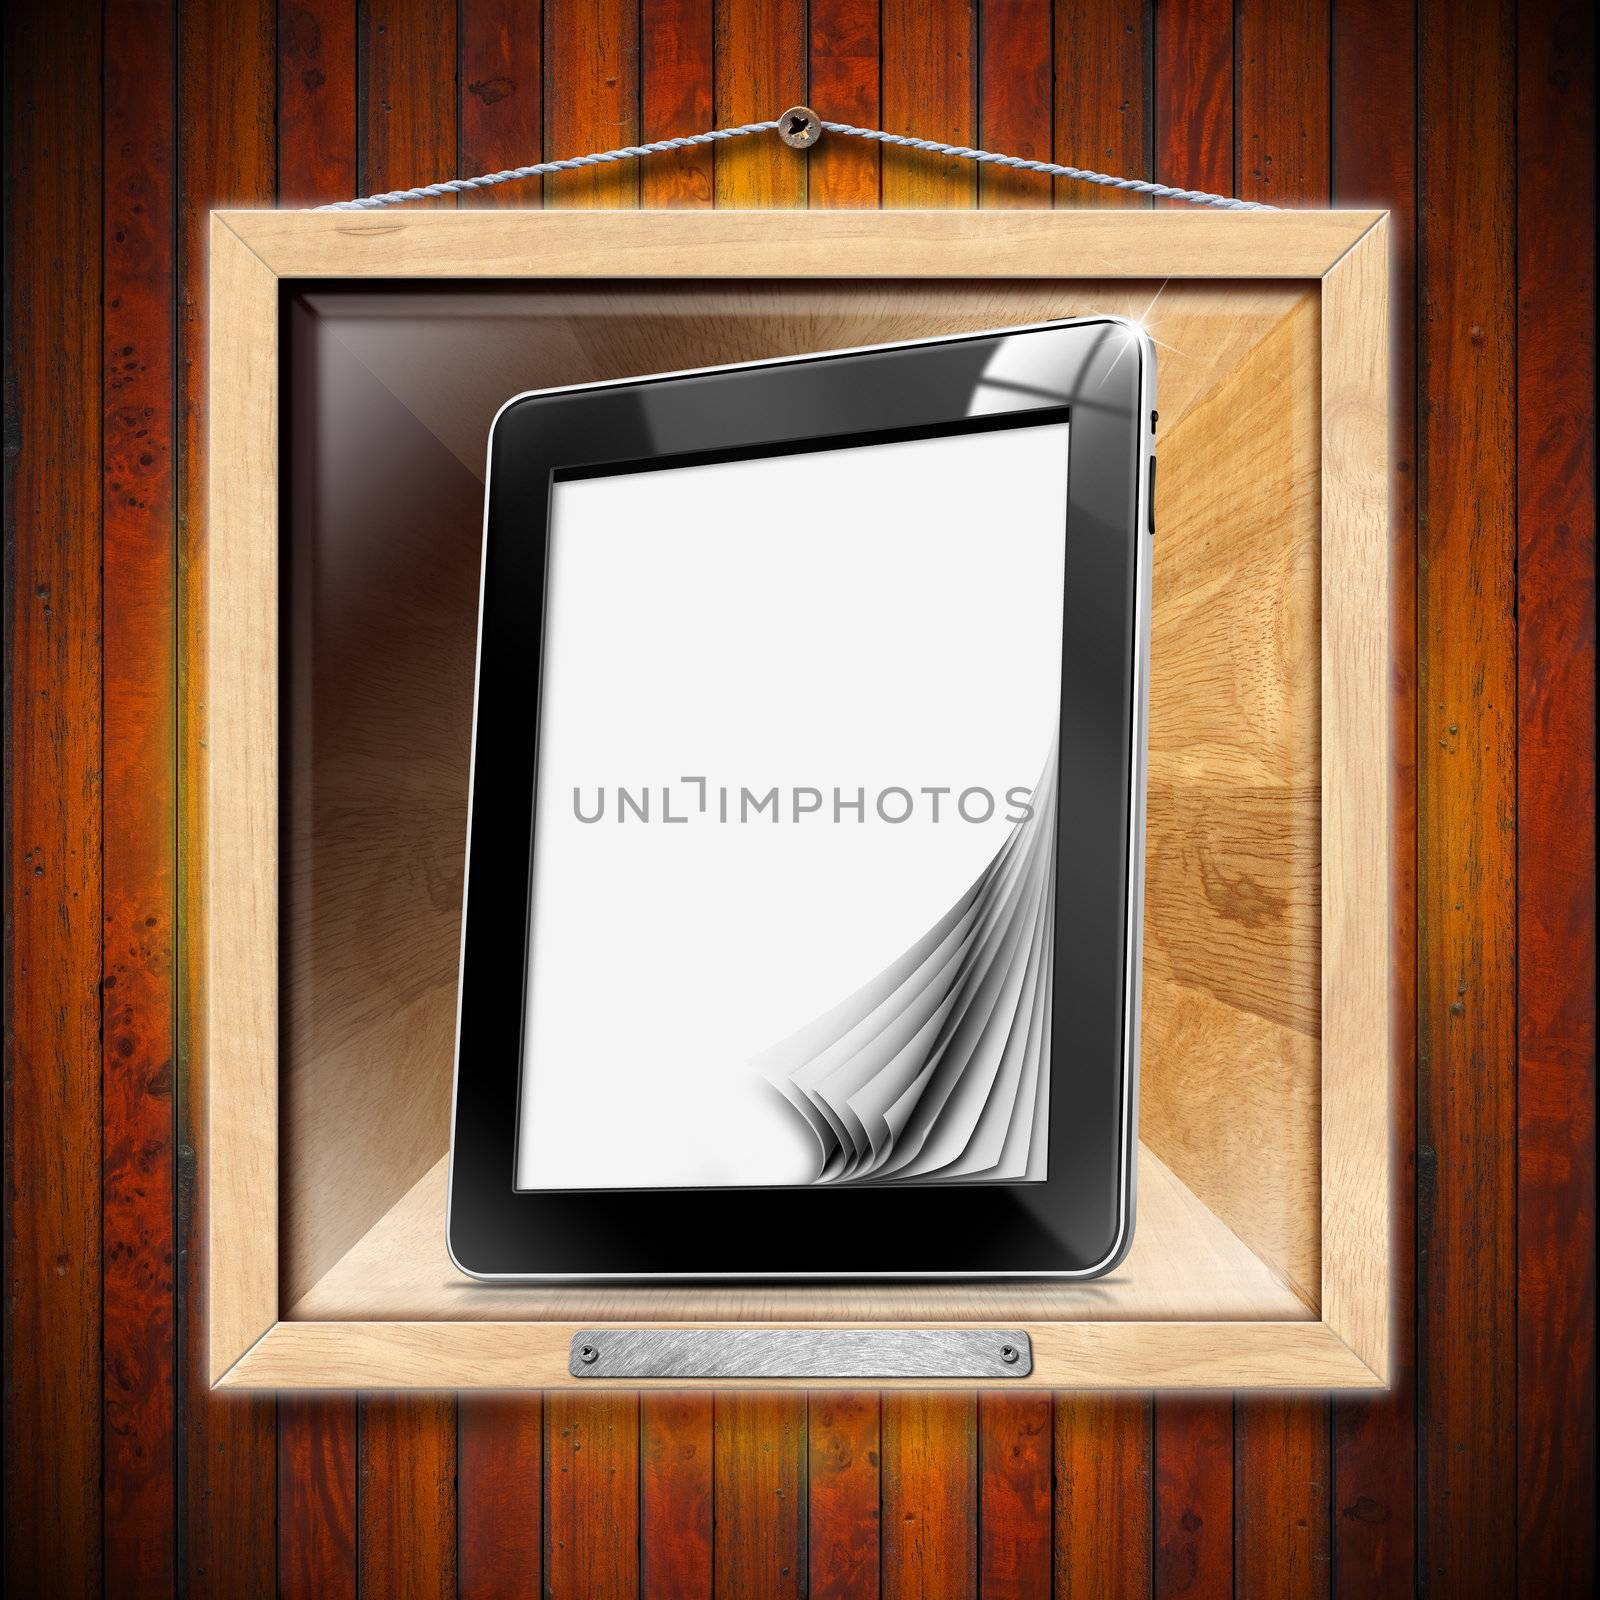 Black tablet computer with blank pages on wooden frame

